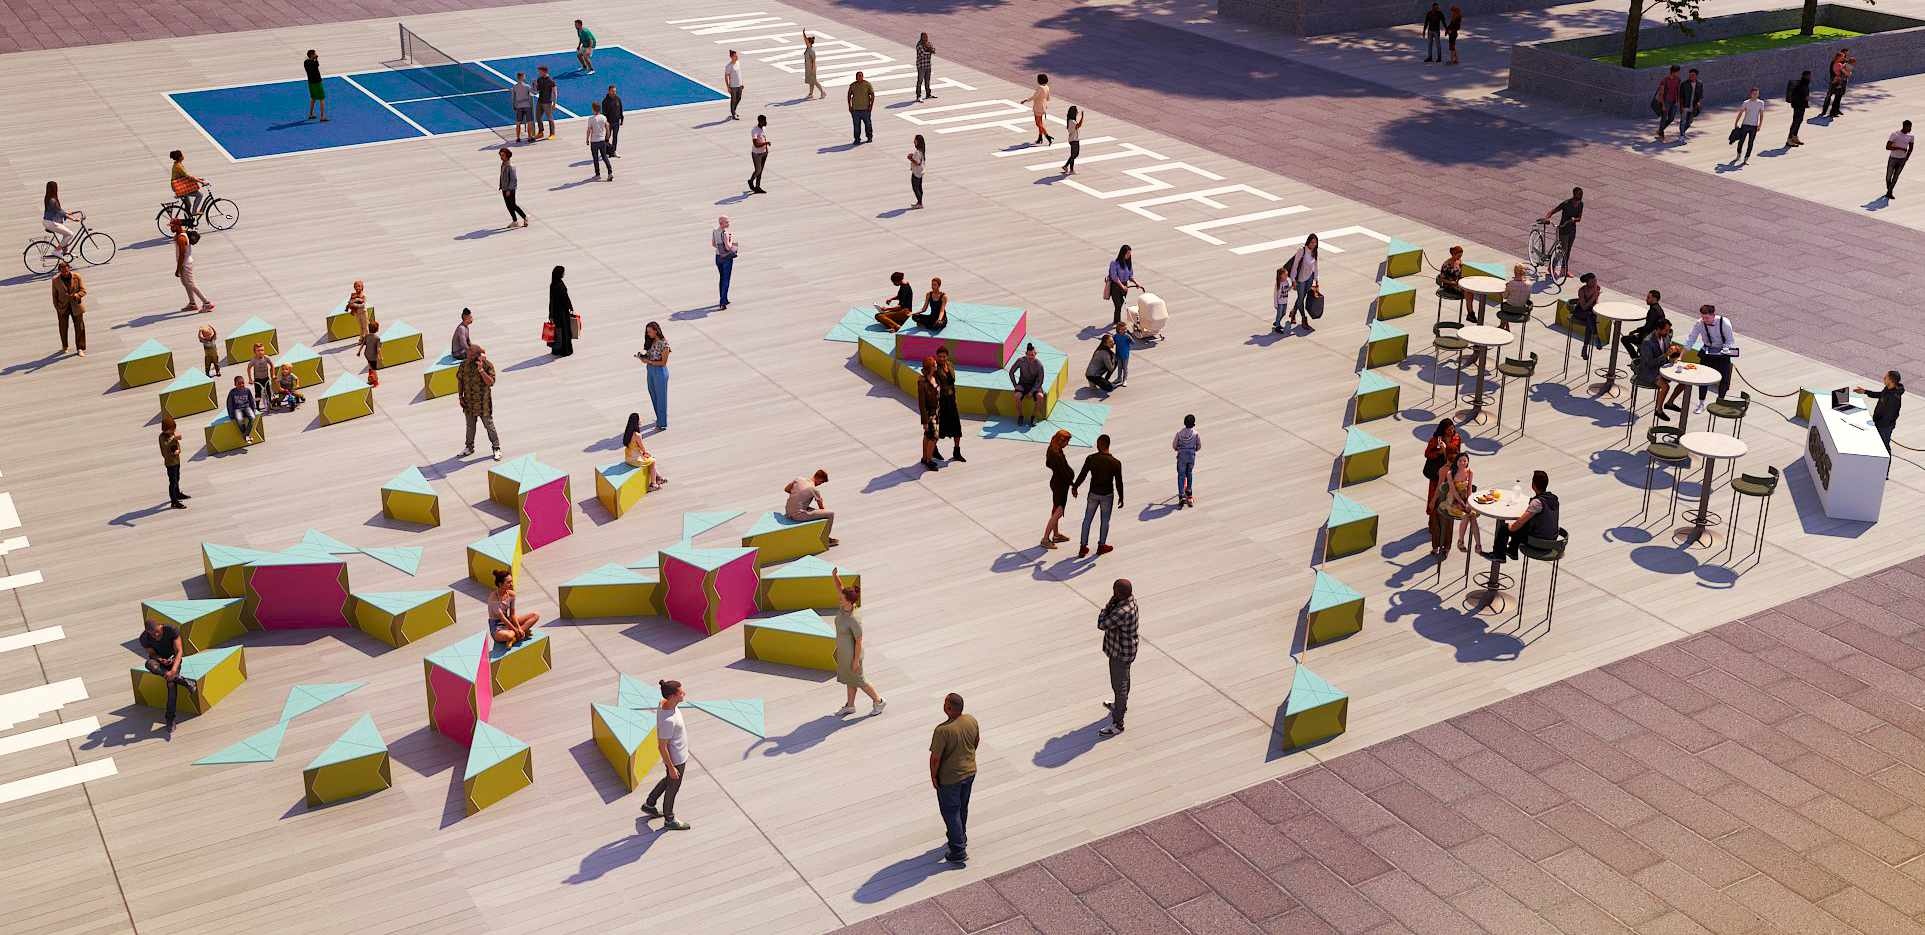 A digital rendering of The Shed's outdoor Plaza seen from above, with triangular seating modules arranged in designs reminiscent of a flower motif. Others are arranged in a sing file line. Visitors walk and sit among the modules. 